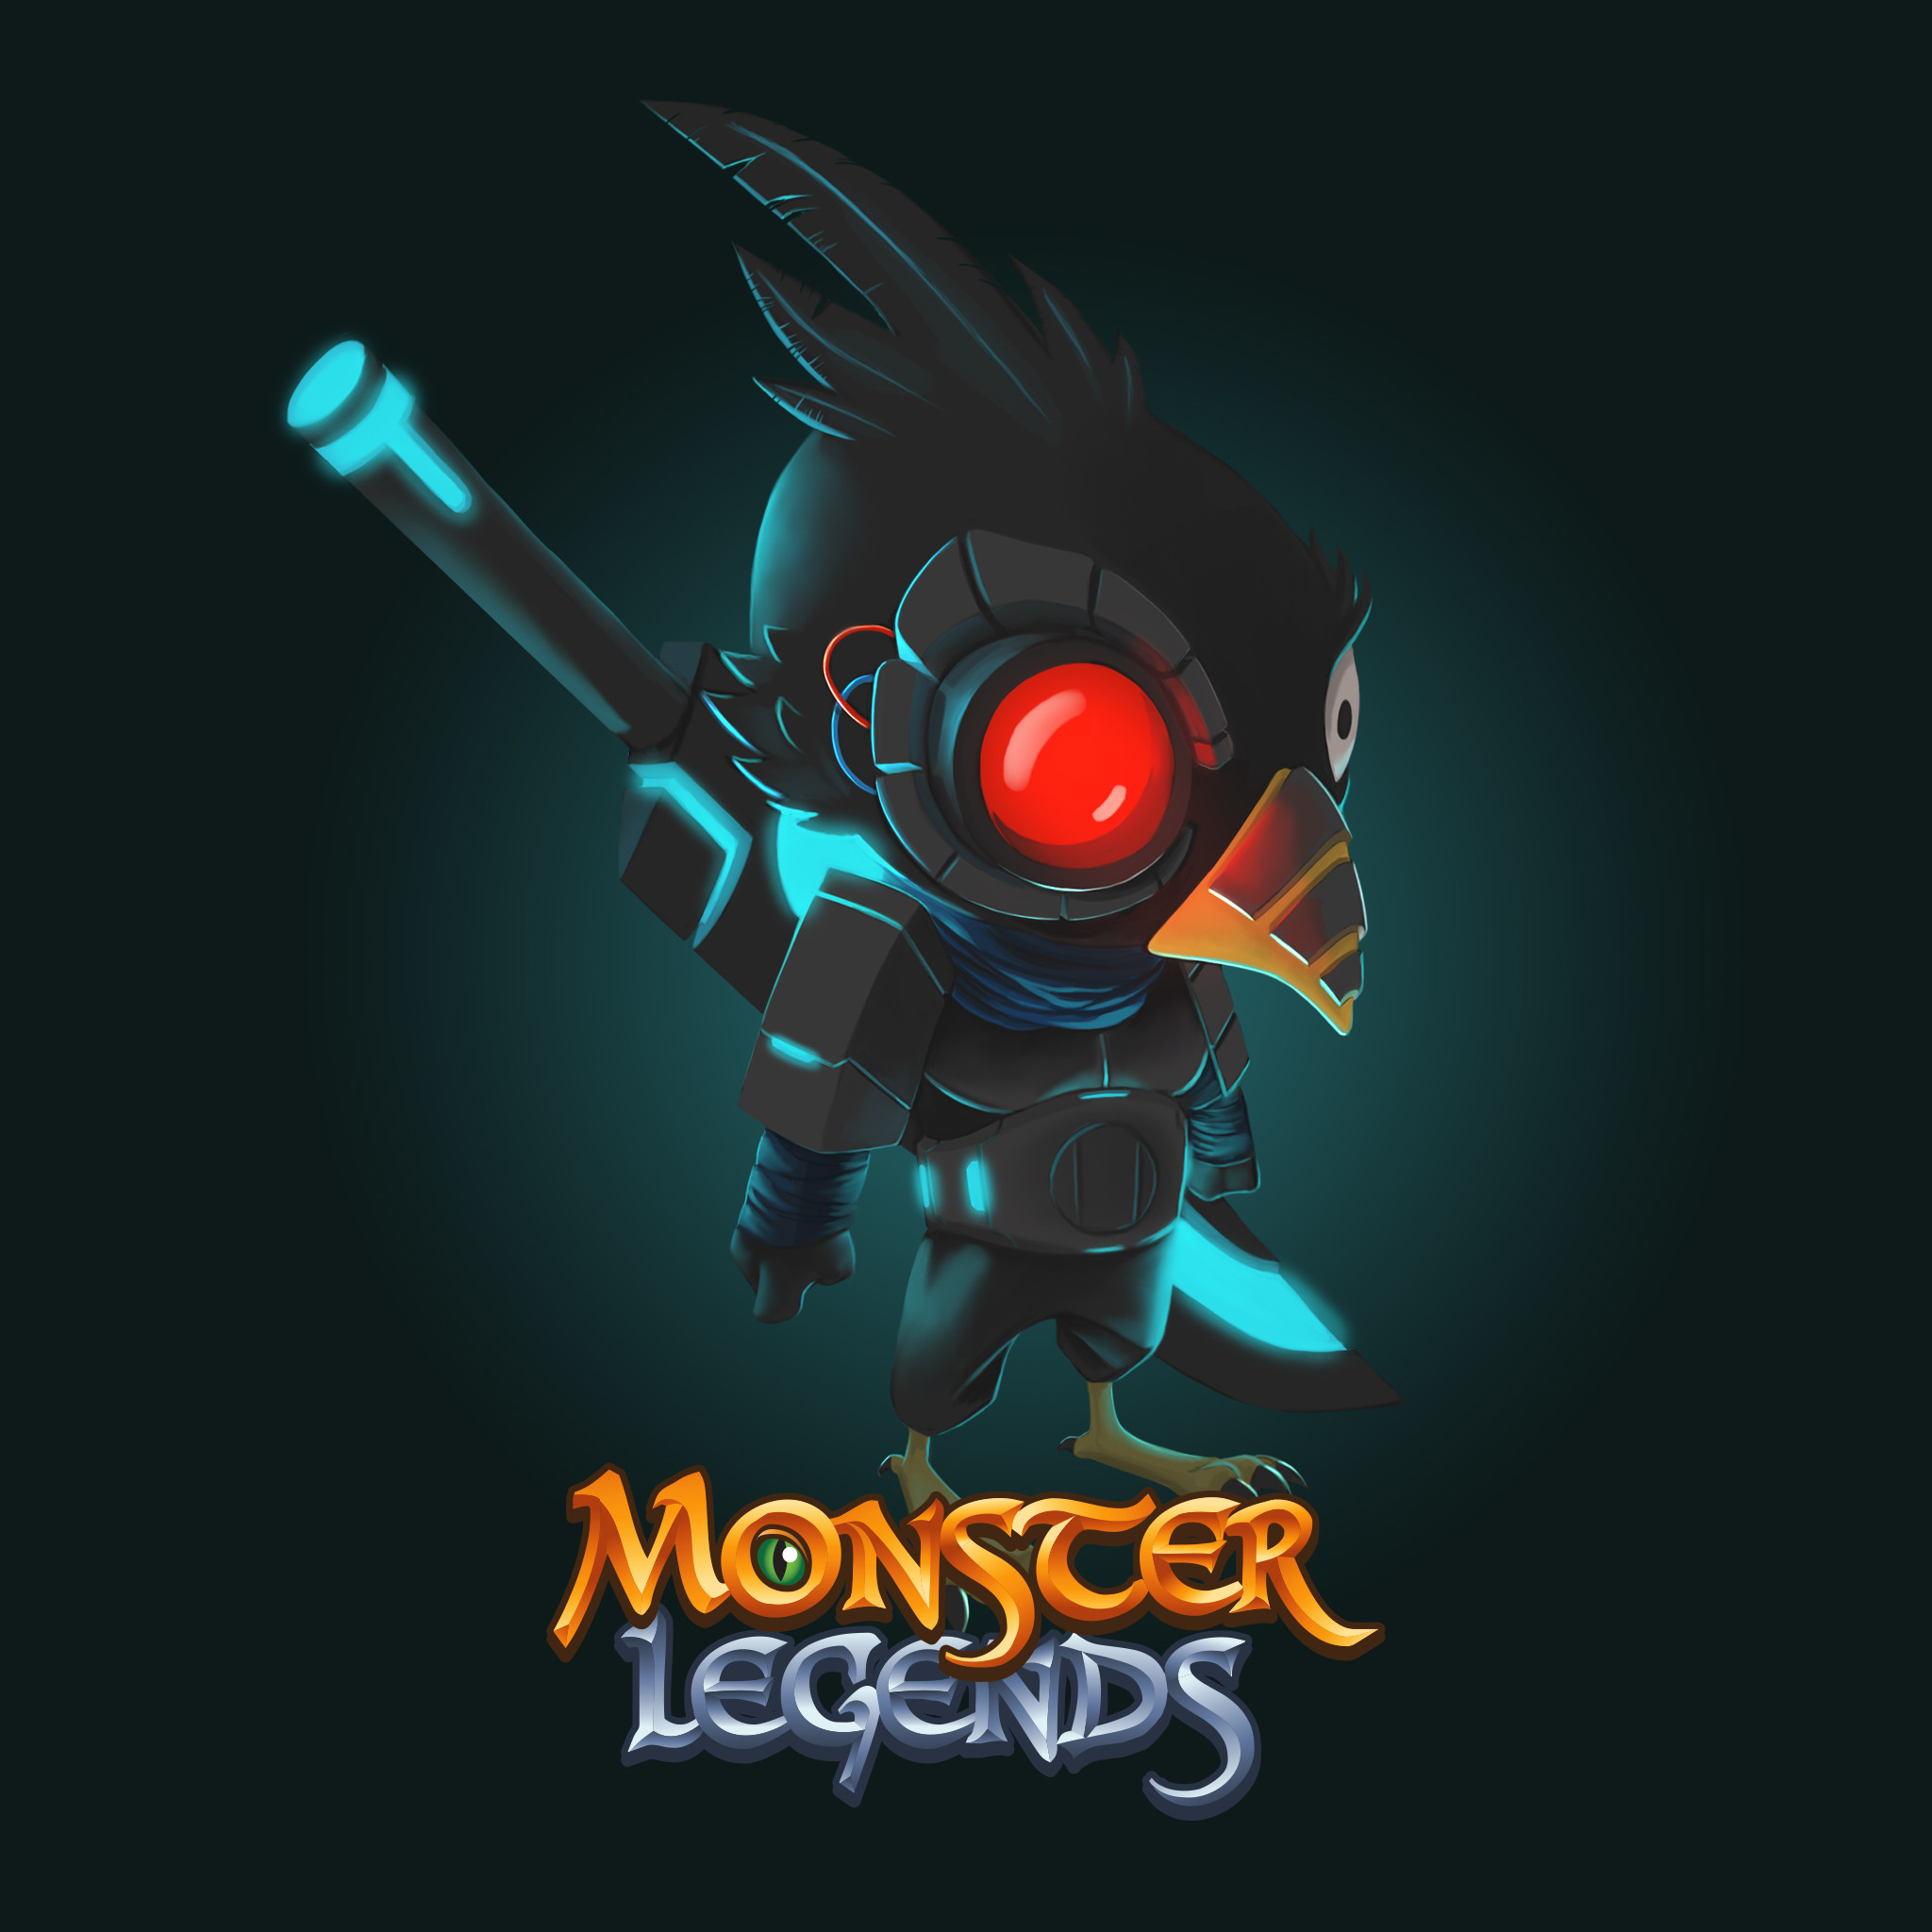 2048x2048 Monster Legends Android, iPhone, iPad Wallpaper